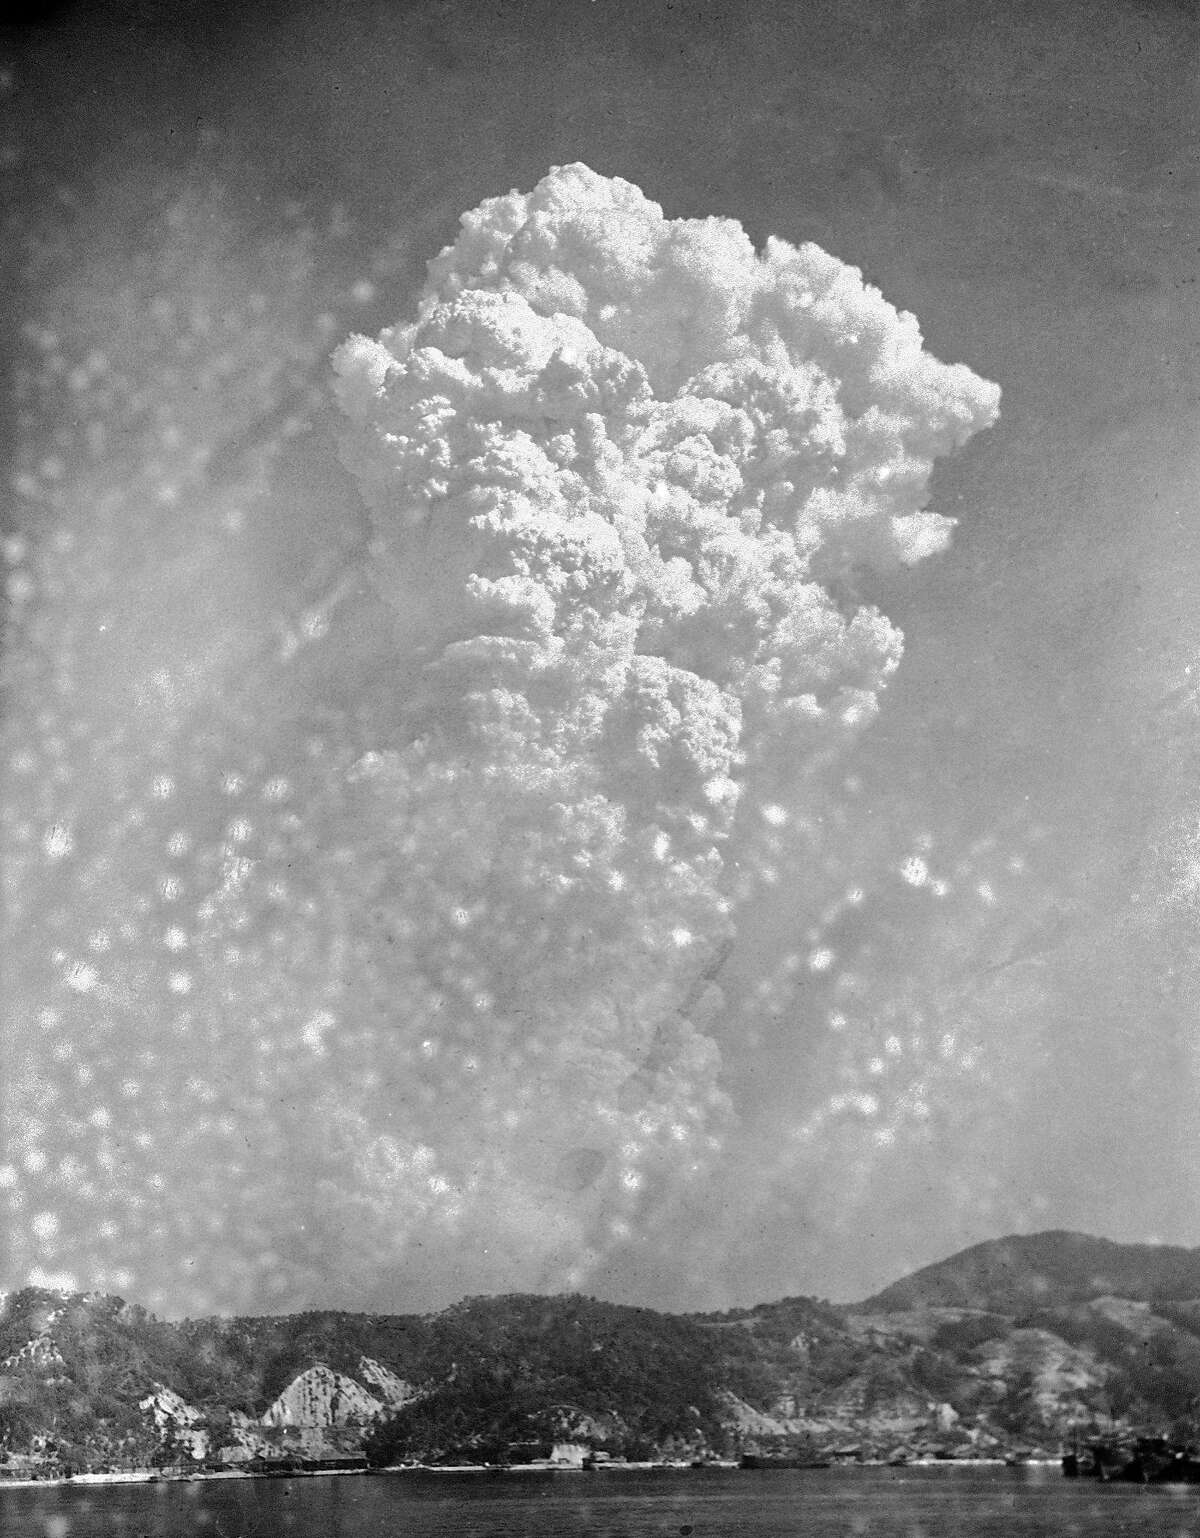 FILE- In this Aug. 6, 1945, file photo, smoke rises around 20,000 feet above Hiroshima, Japan, after the first atomic bomb was dropped. On two days in August 1945, U.S. planes dropped two atomic bombs, one on Hiroshima, one on Nagasaki, the first and only time nuclear weapons have been used. Their destructive power was unprecedented, incinerating buildings and people, and leaving lifelong scars on survivors, not just physical but also psychological, and on the cities themselves. Days later, World War II was over. (AP Photo, File)